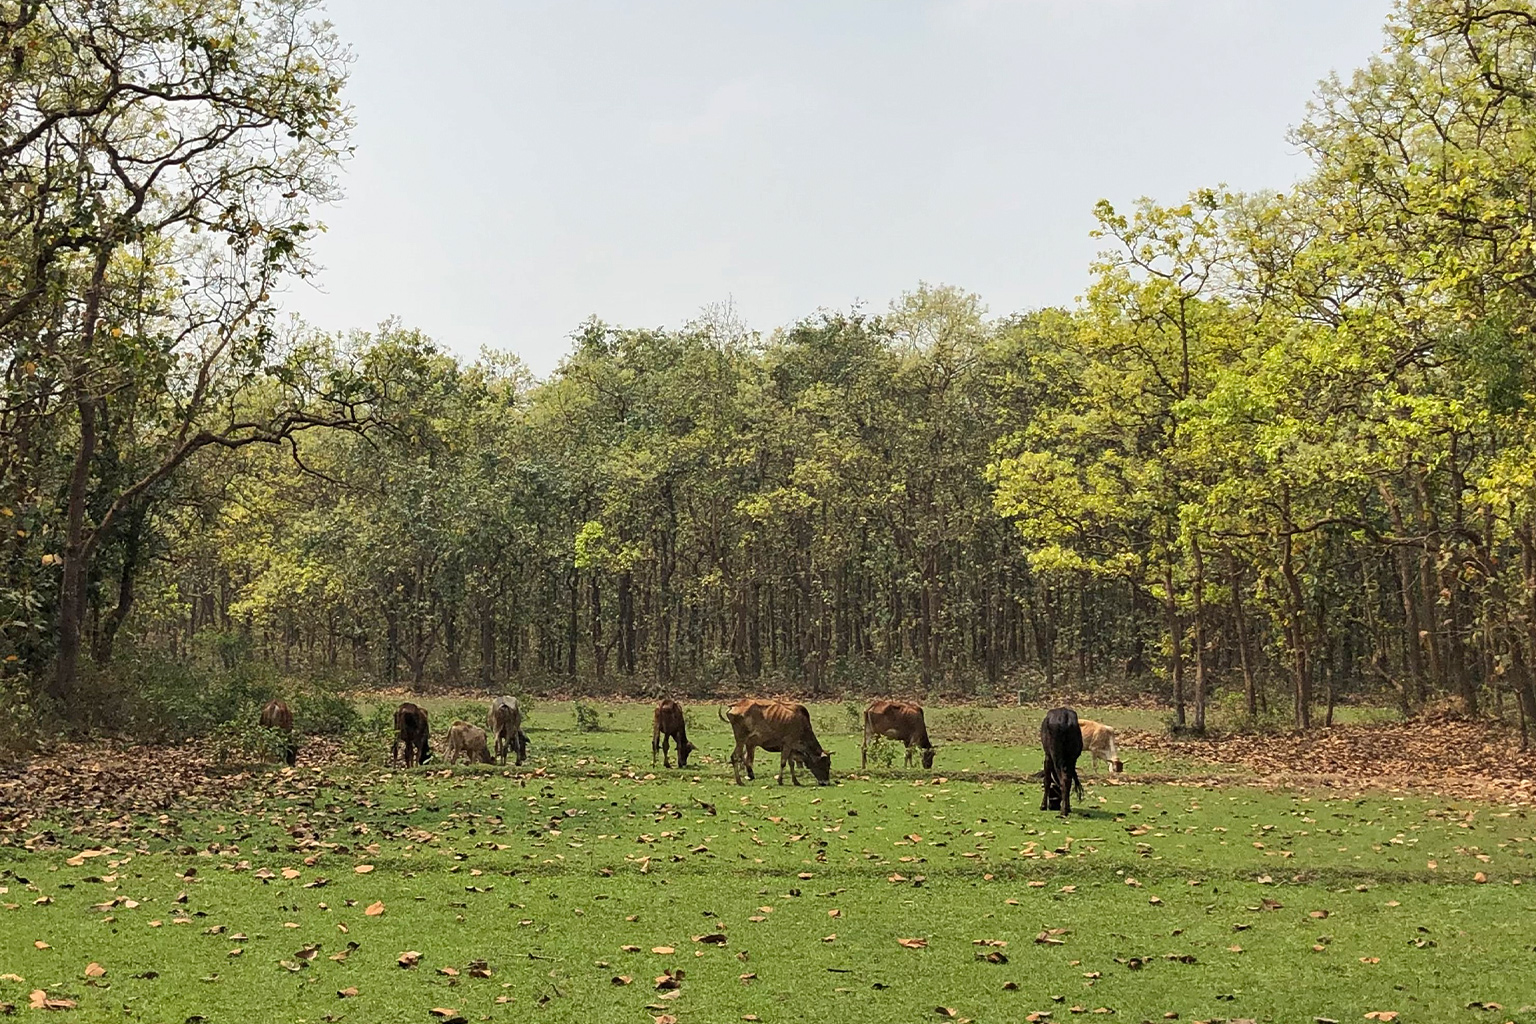 Cattle grazing in a forest.